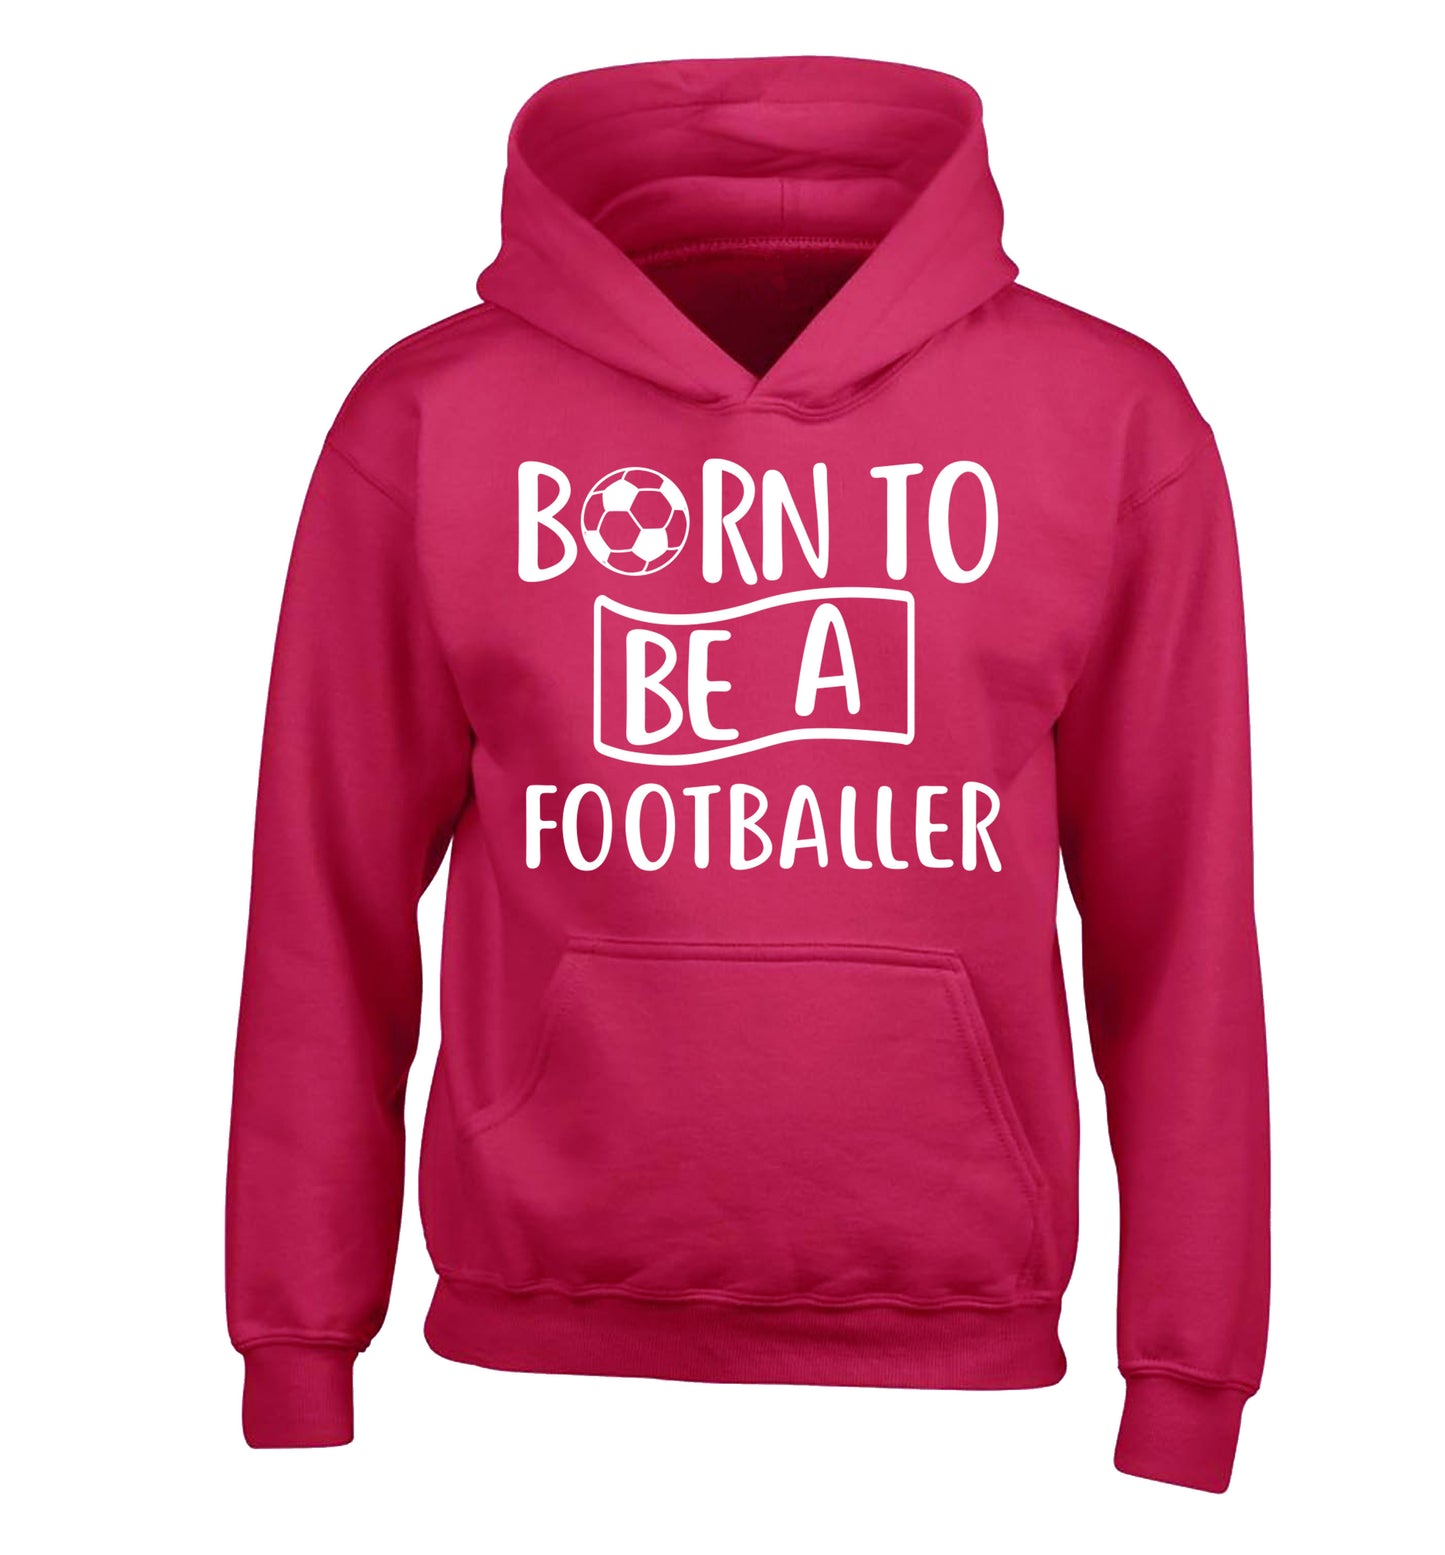 Born to be a footballer children's pink hoodie 12-14 Years